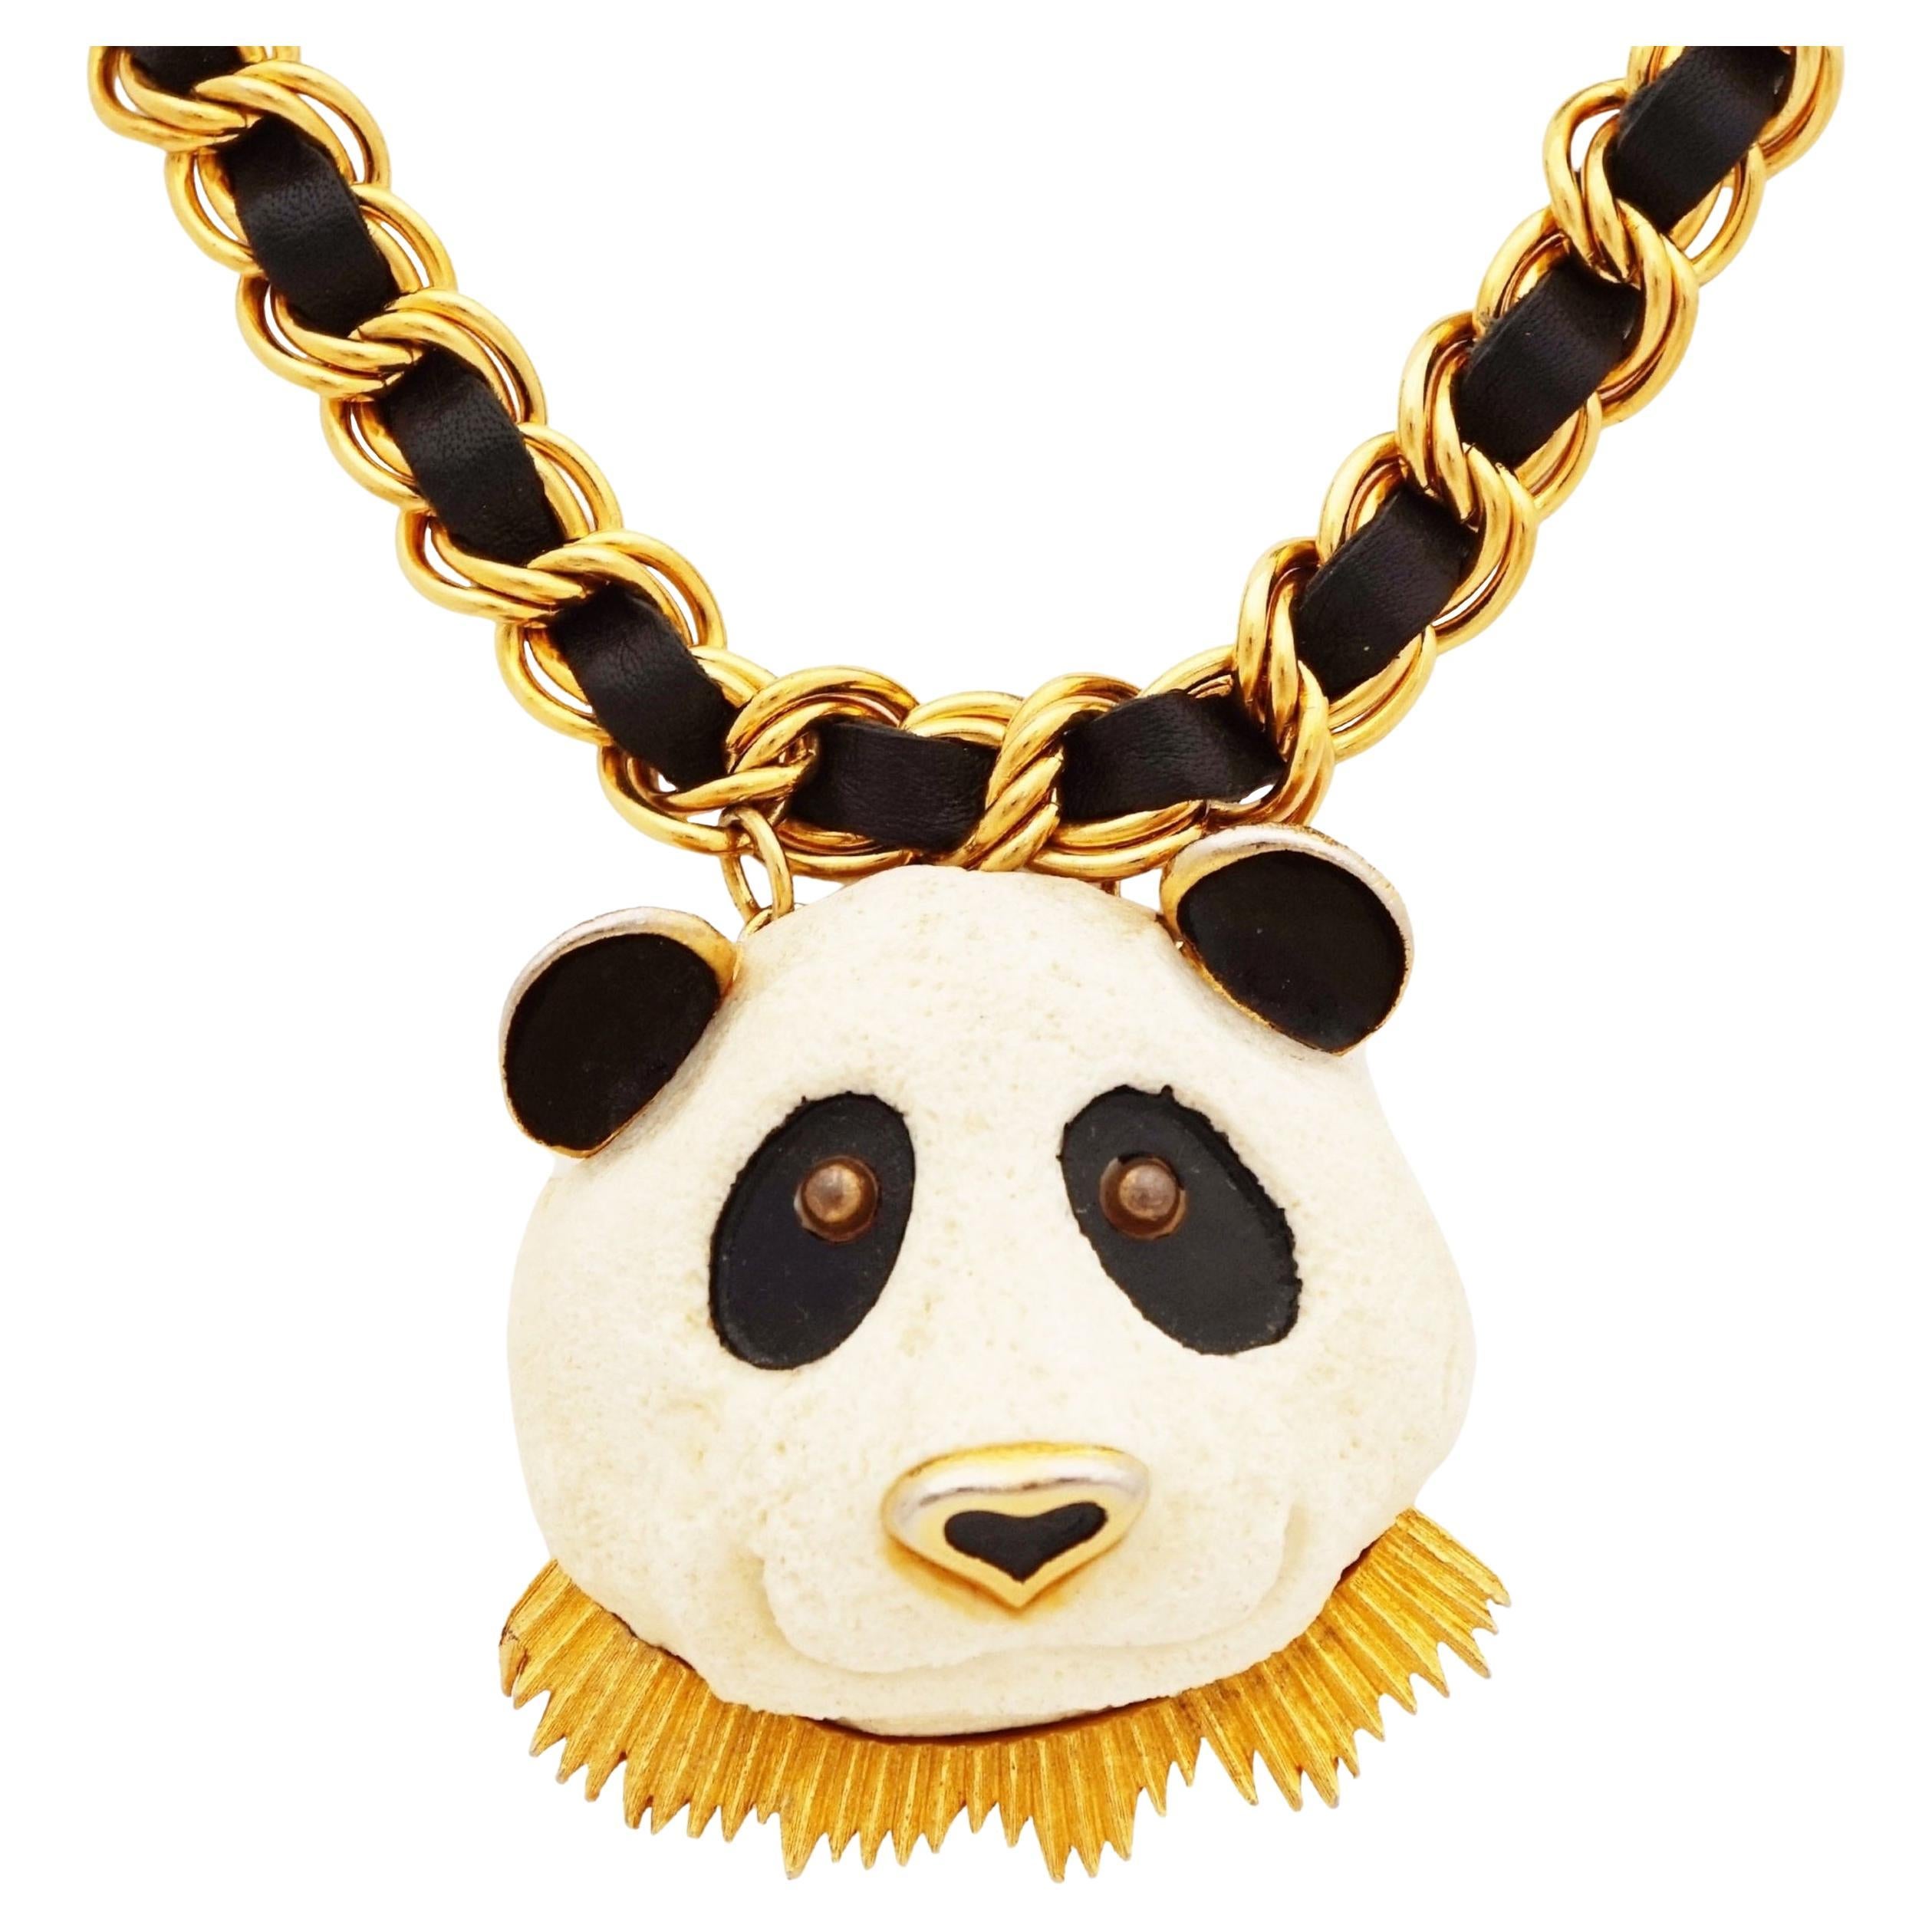 70s Panda Face Pendant Statement Necklace w Woven Black Leather Chain By RAZZA For Sale